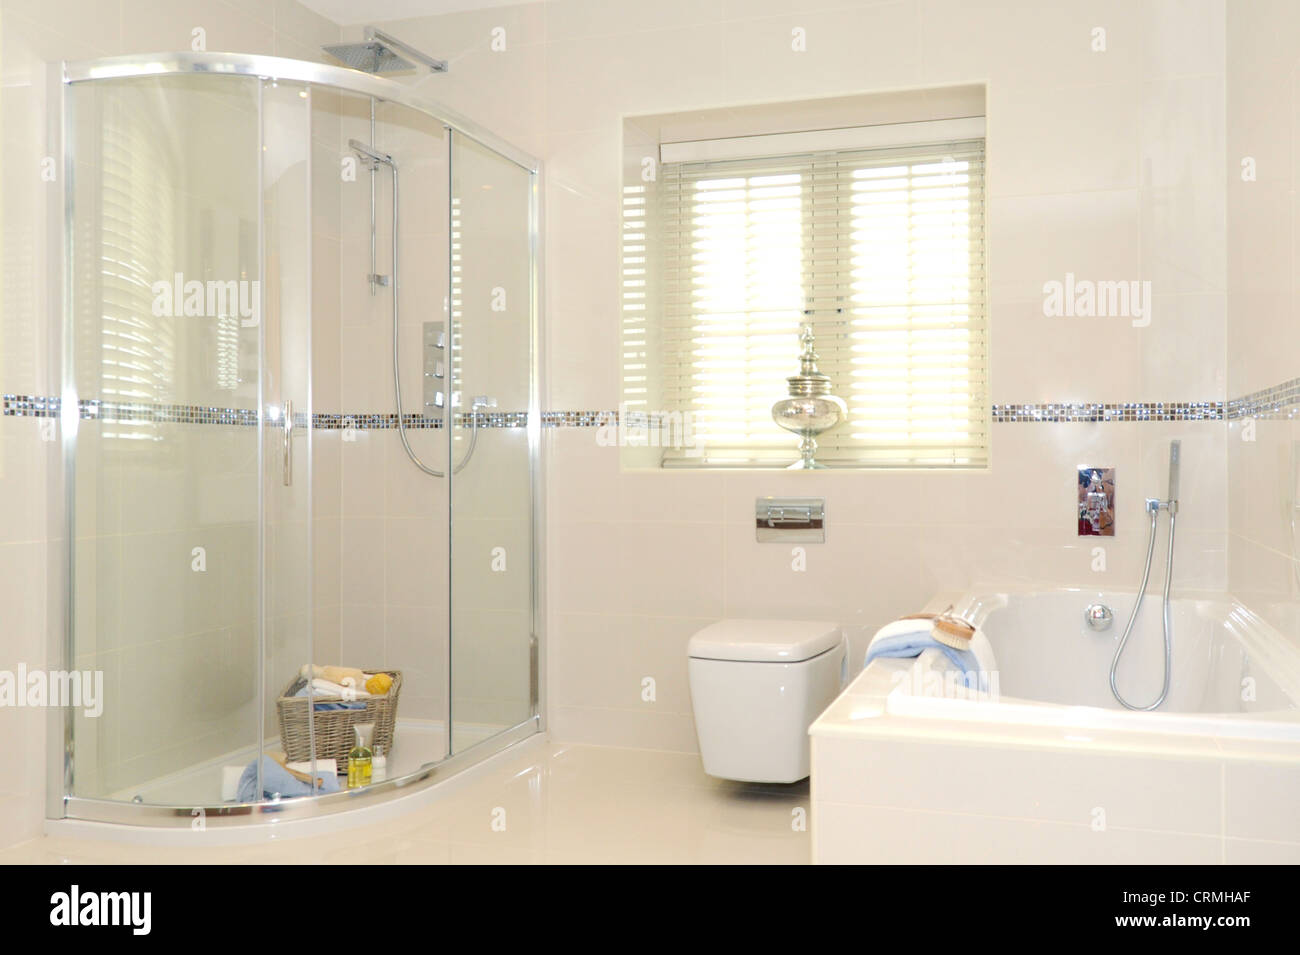 a quality bathroom including shower and enclosure, toilet and bath, with white tile decoration Stock Photo